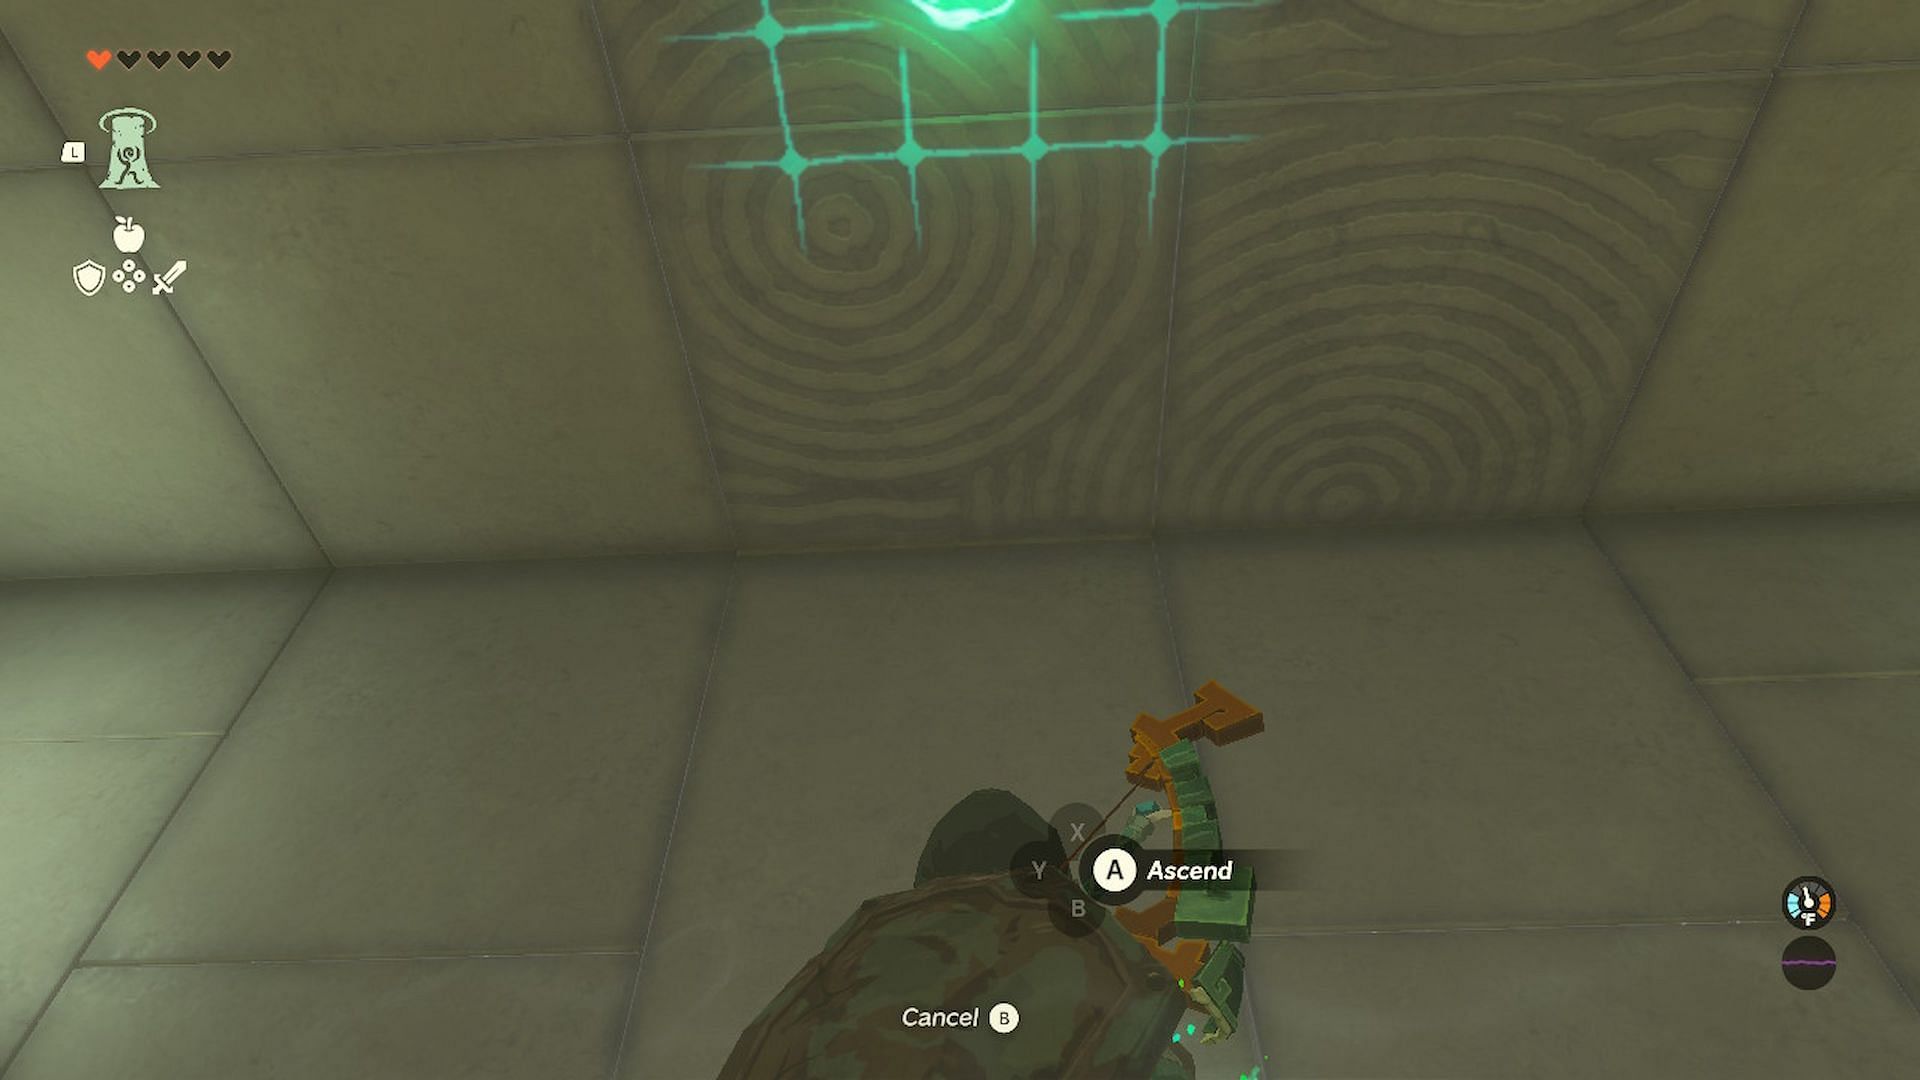 Using Ascend on the wall above (Image via Nintendo)